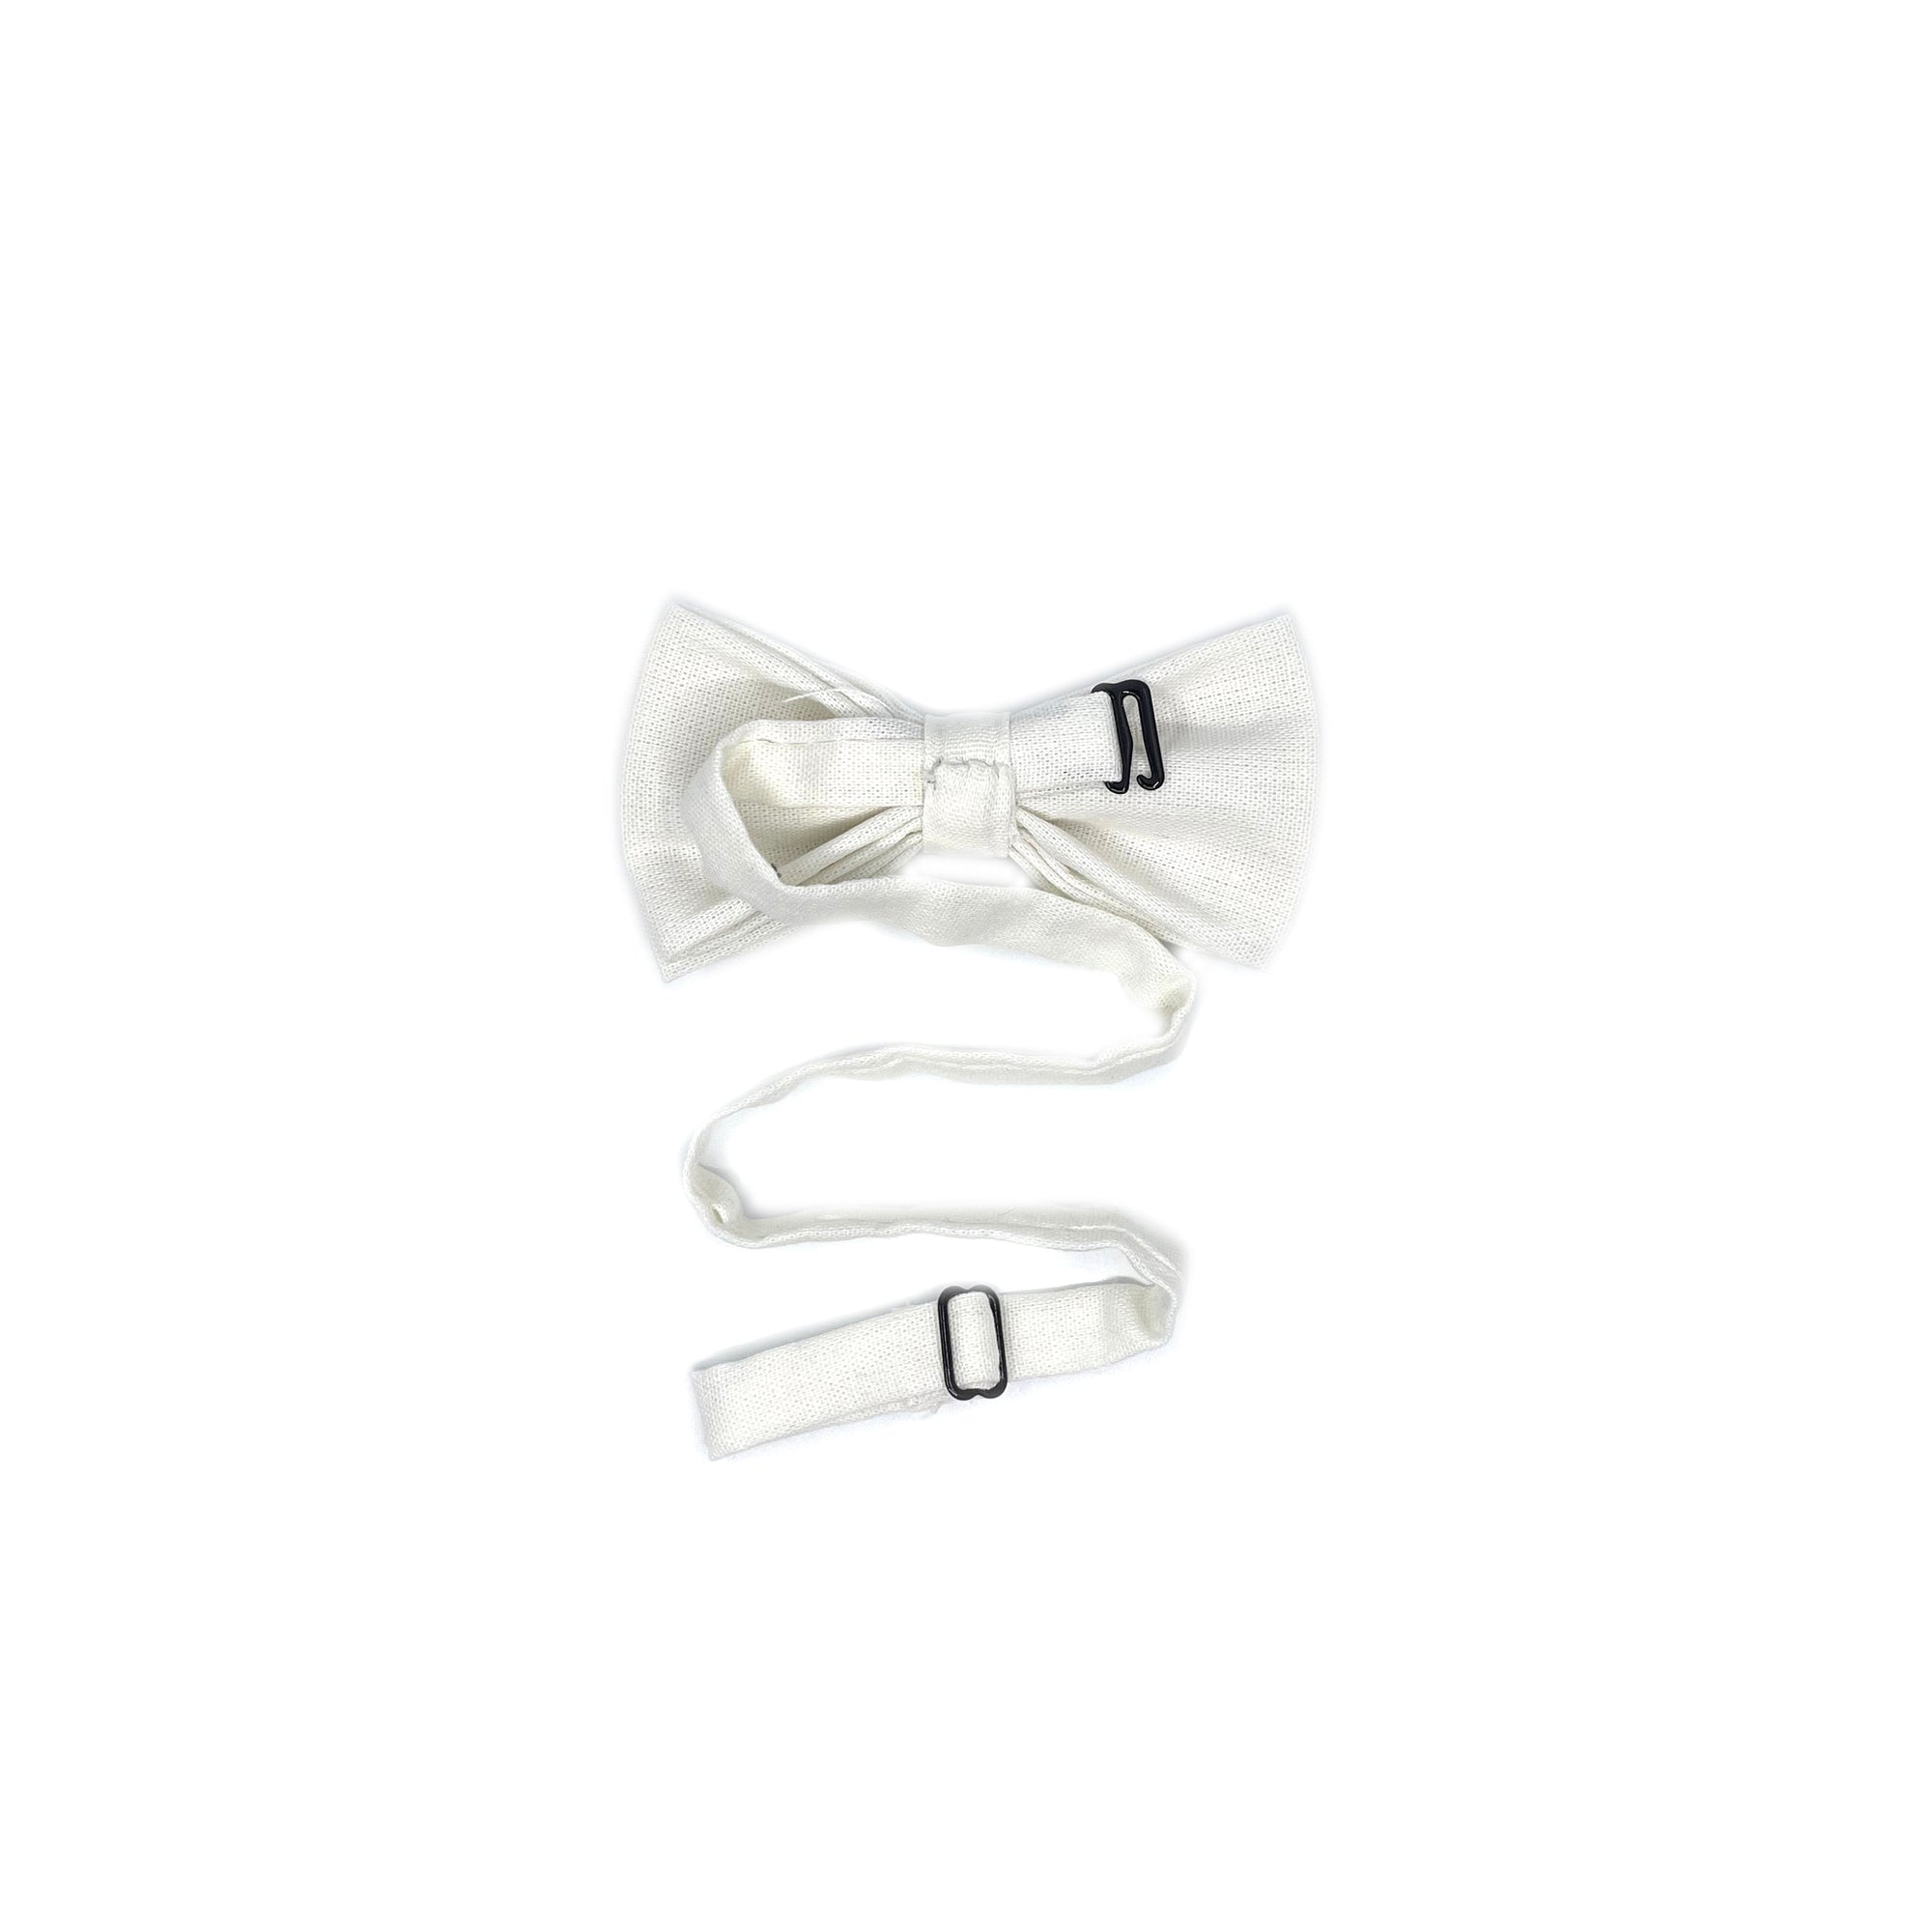 Kids Off White Bow Tie - NATE by Mytieshop-Kids Off White Bow Tie (Pretied) for KidsStrap is Adjustable - 32CM Long (10-18 Inches)Pre-Tied bowtieBow Tie 12CM * 6CMMade from Cotton Color: White-Mytieshop